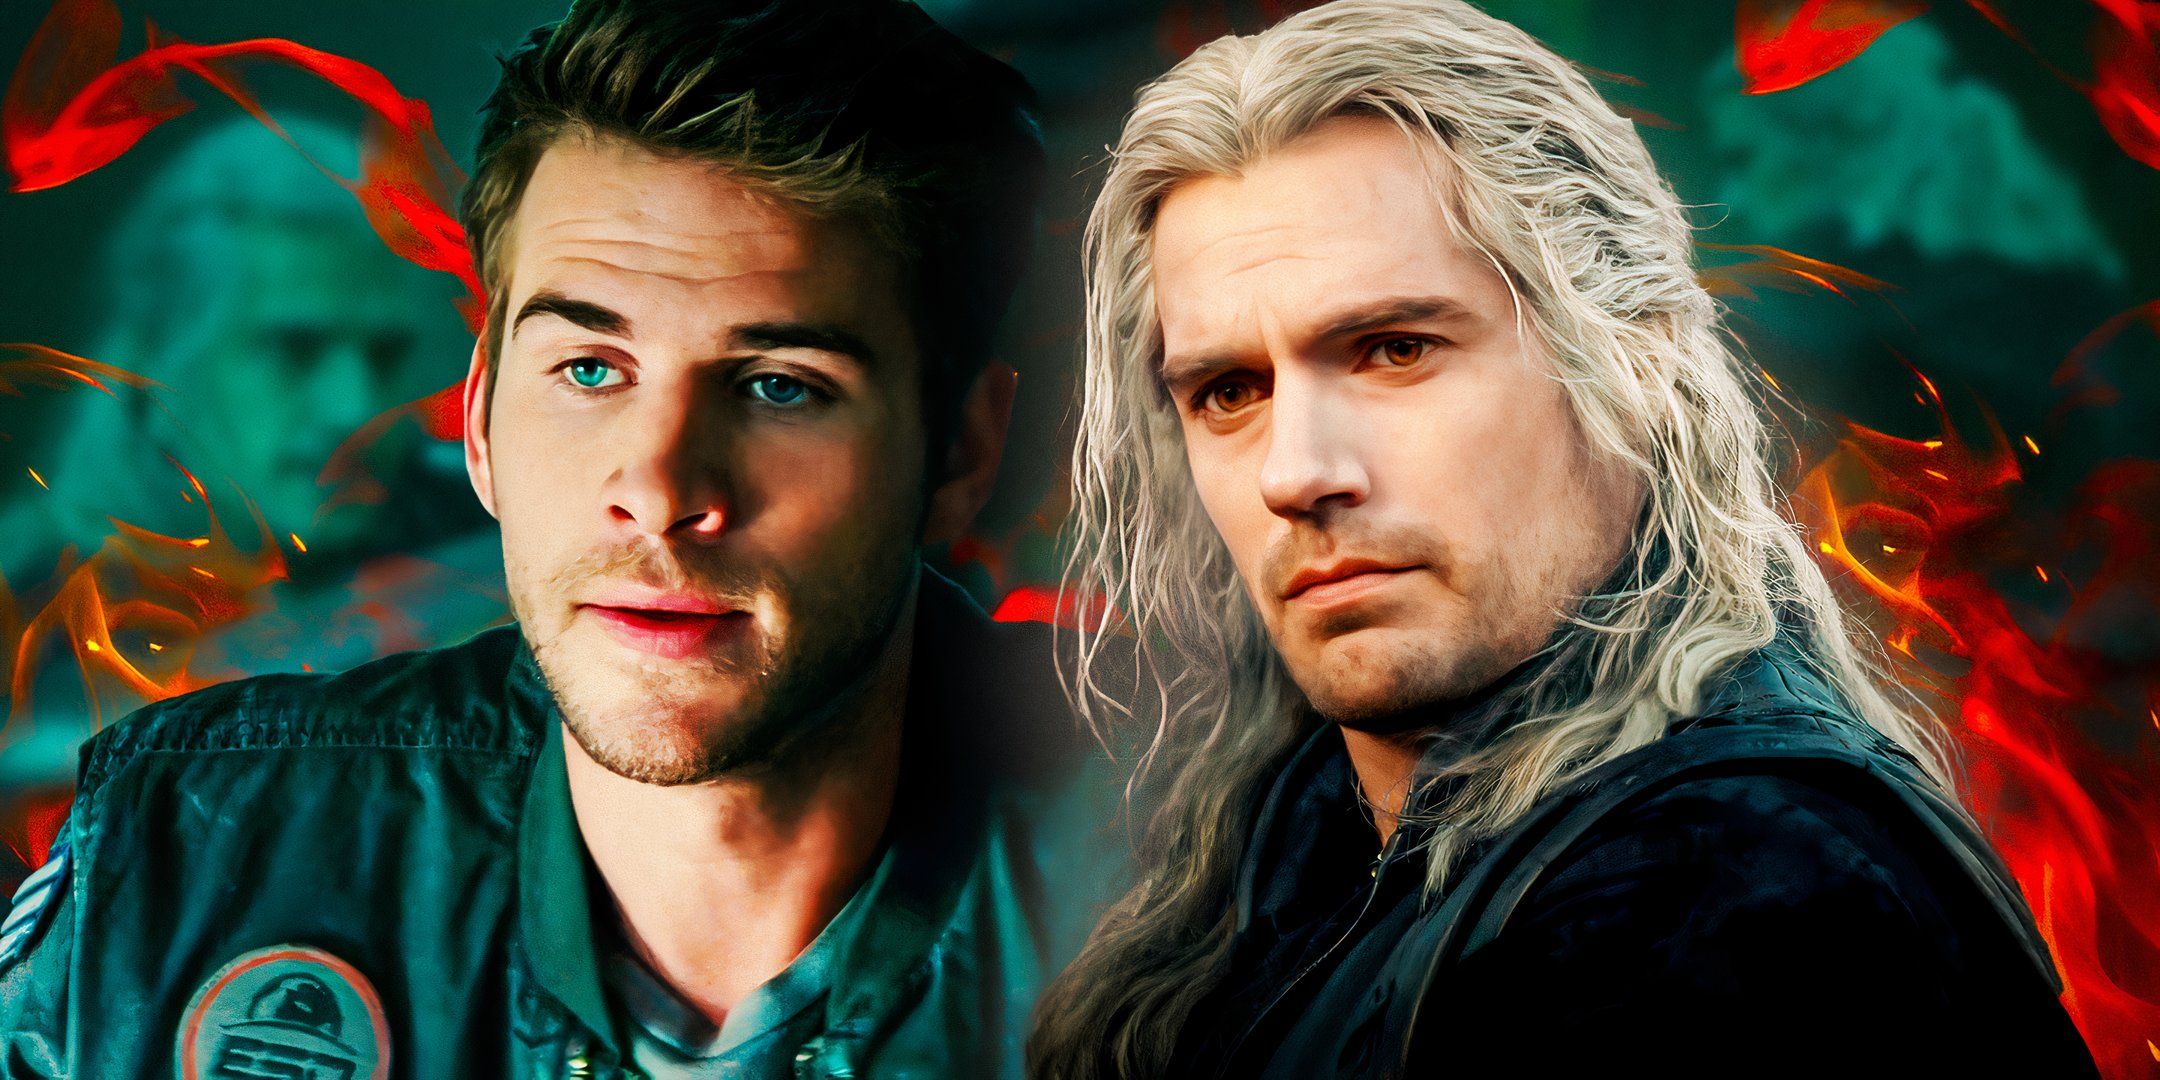 (Henry-Cavill-as-Geralt-of-Rivia)-from-The-Witcher-and-(Liam-Hemsworth-as-Jake-Morrison)-from-Independence-Day-Resurgence